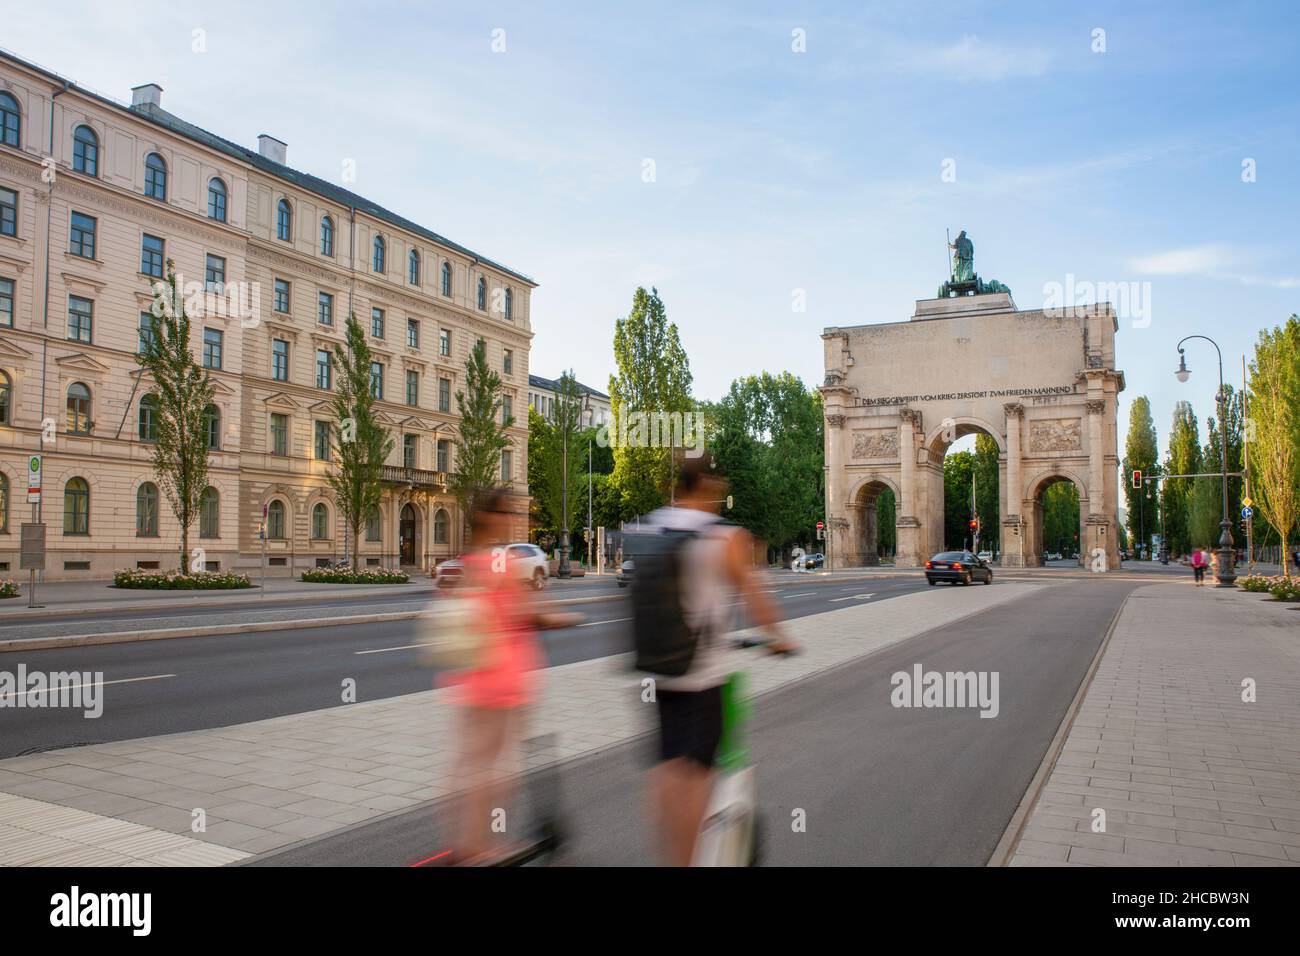 Germany, Bavaria, Munich, Two people riding electric push scooters towards Siegestor gate Stock Photo